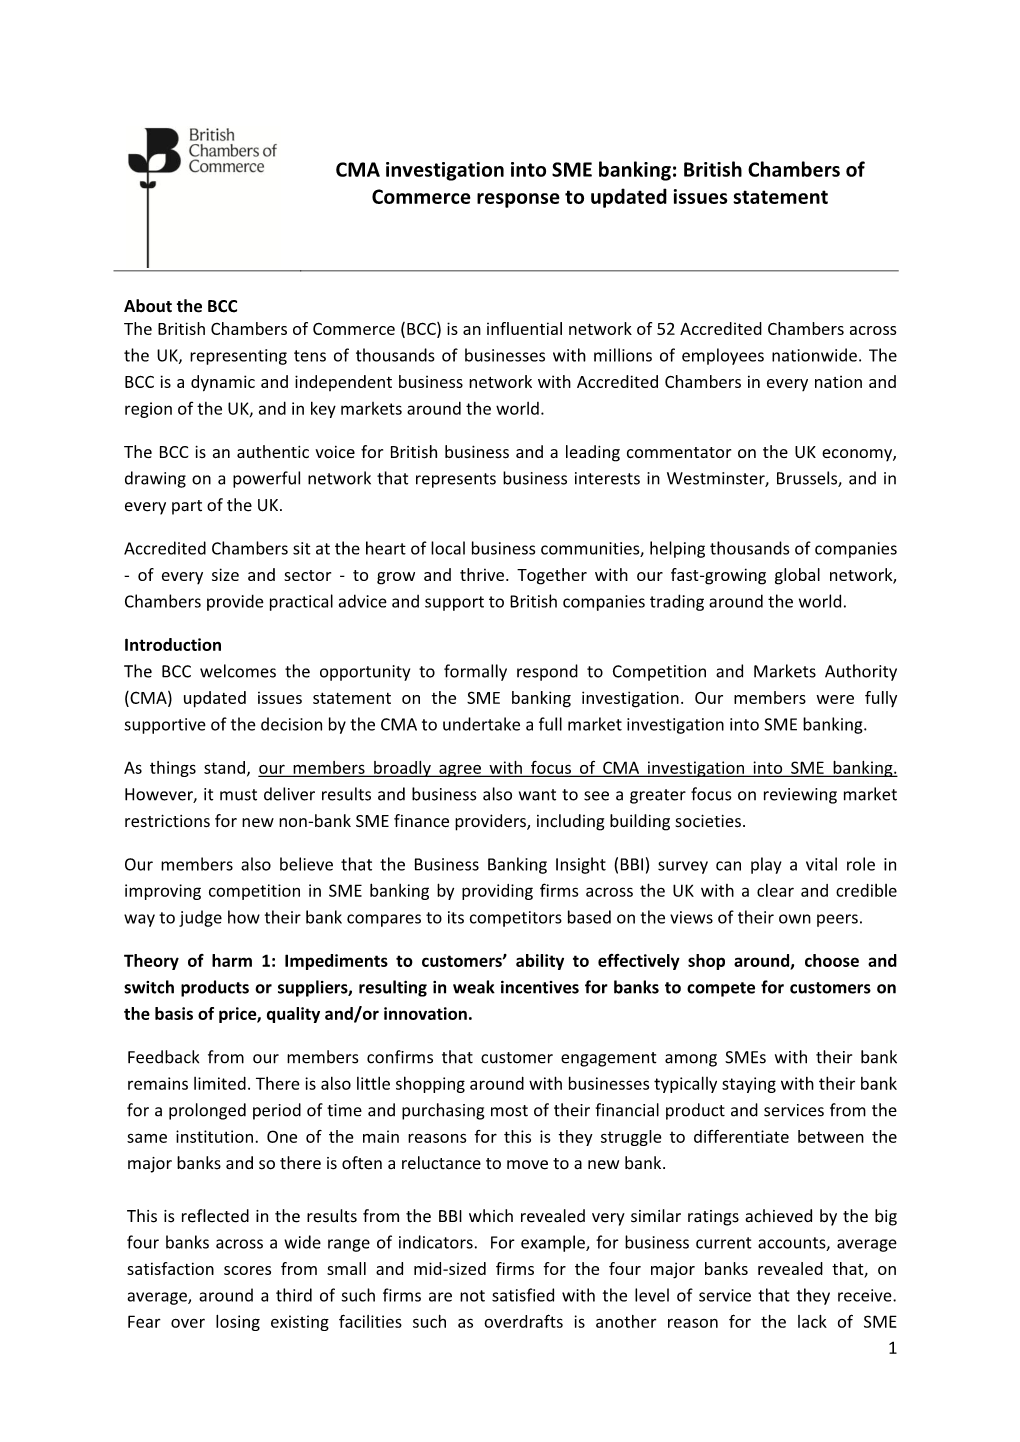 CMA Investigation Into SME Banking: British Chambers of Commerce Response to Updated Issues Statement